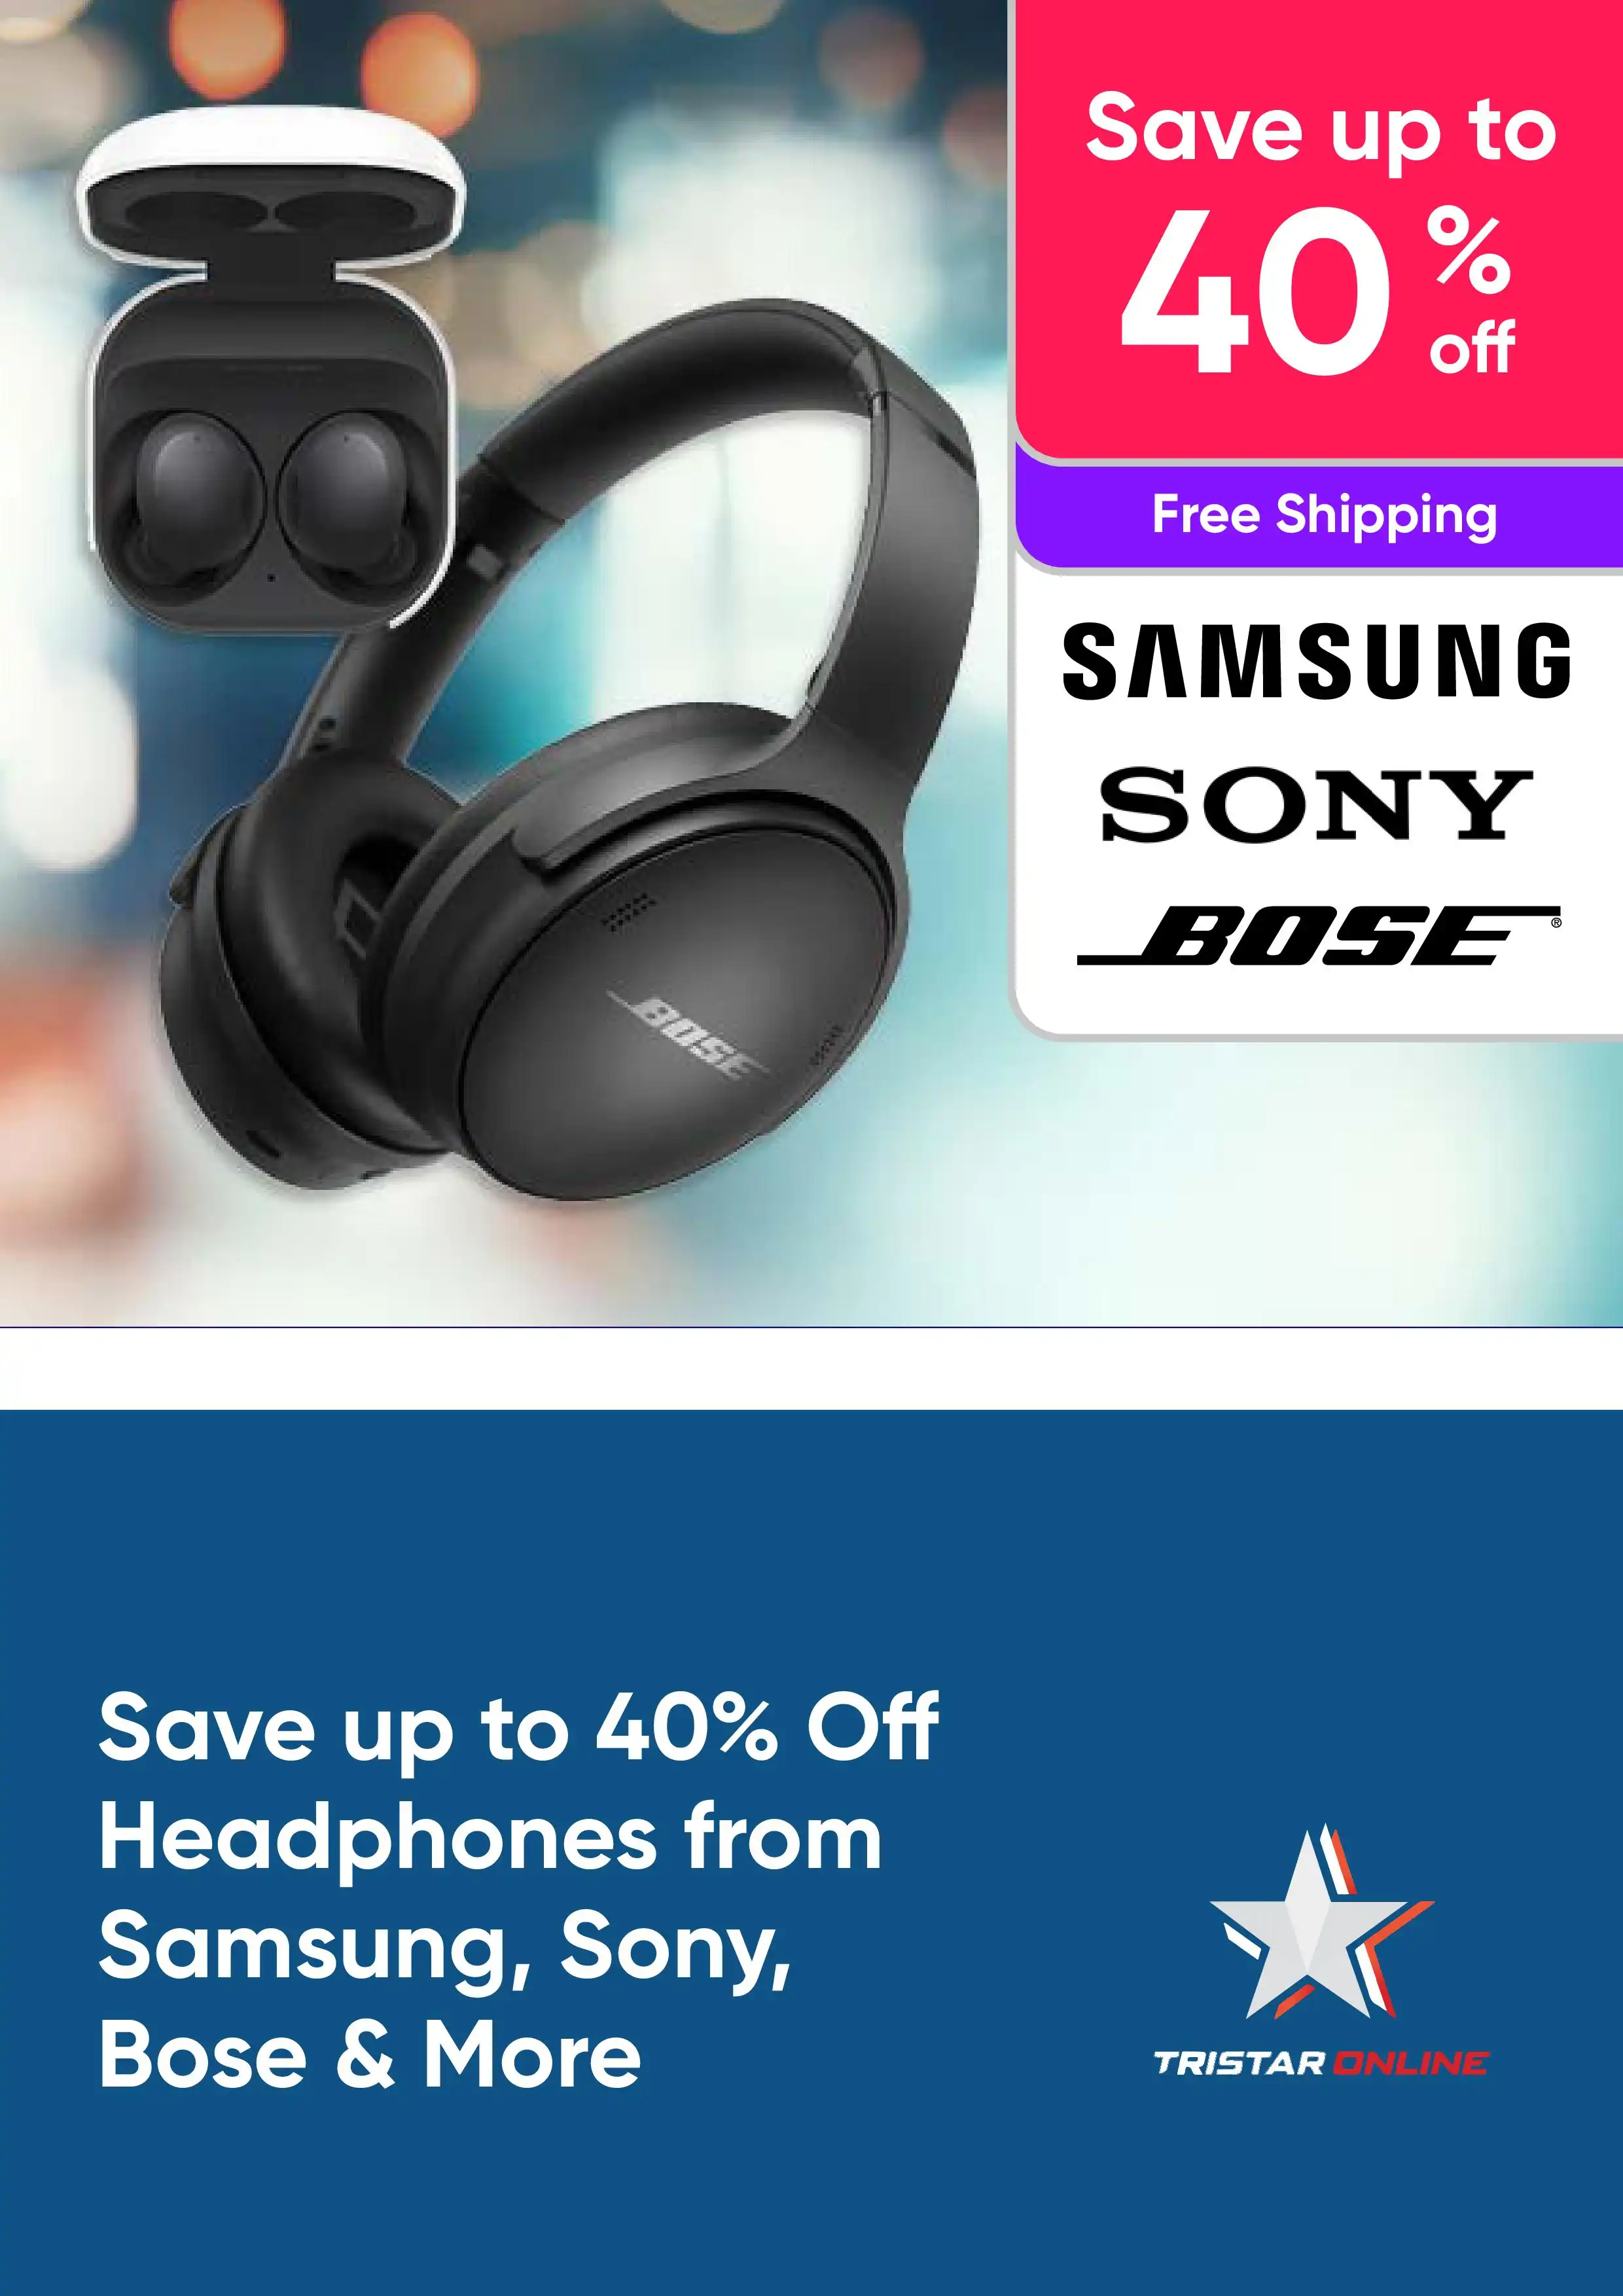 Save up to 40% Off Headphones from Samsung, Sony, Bose & More